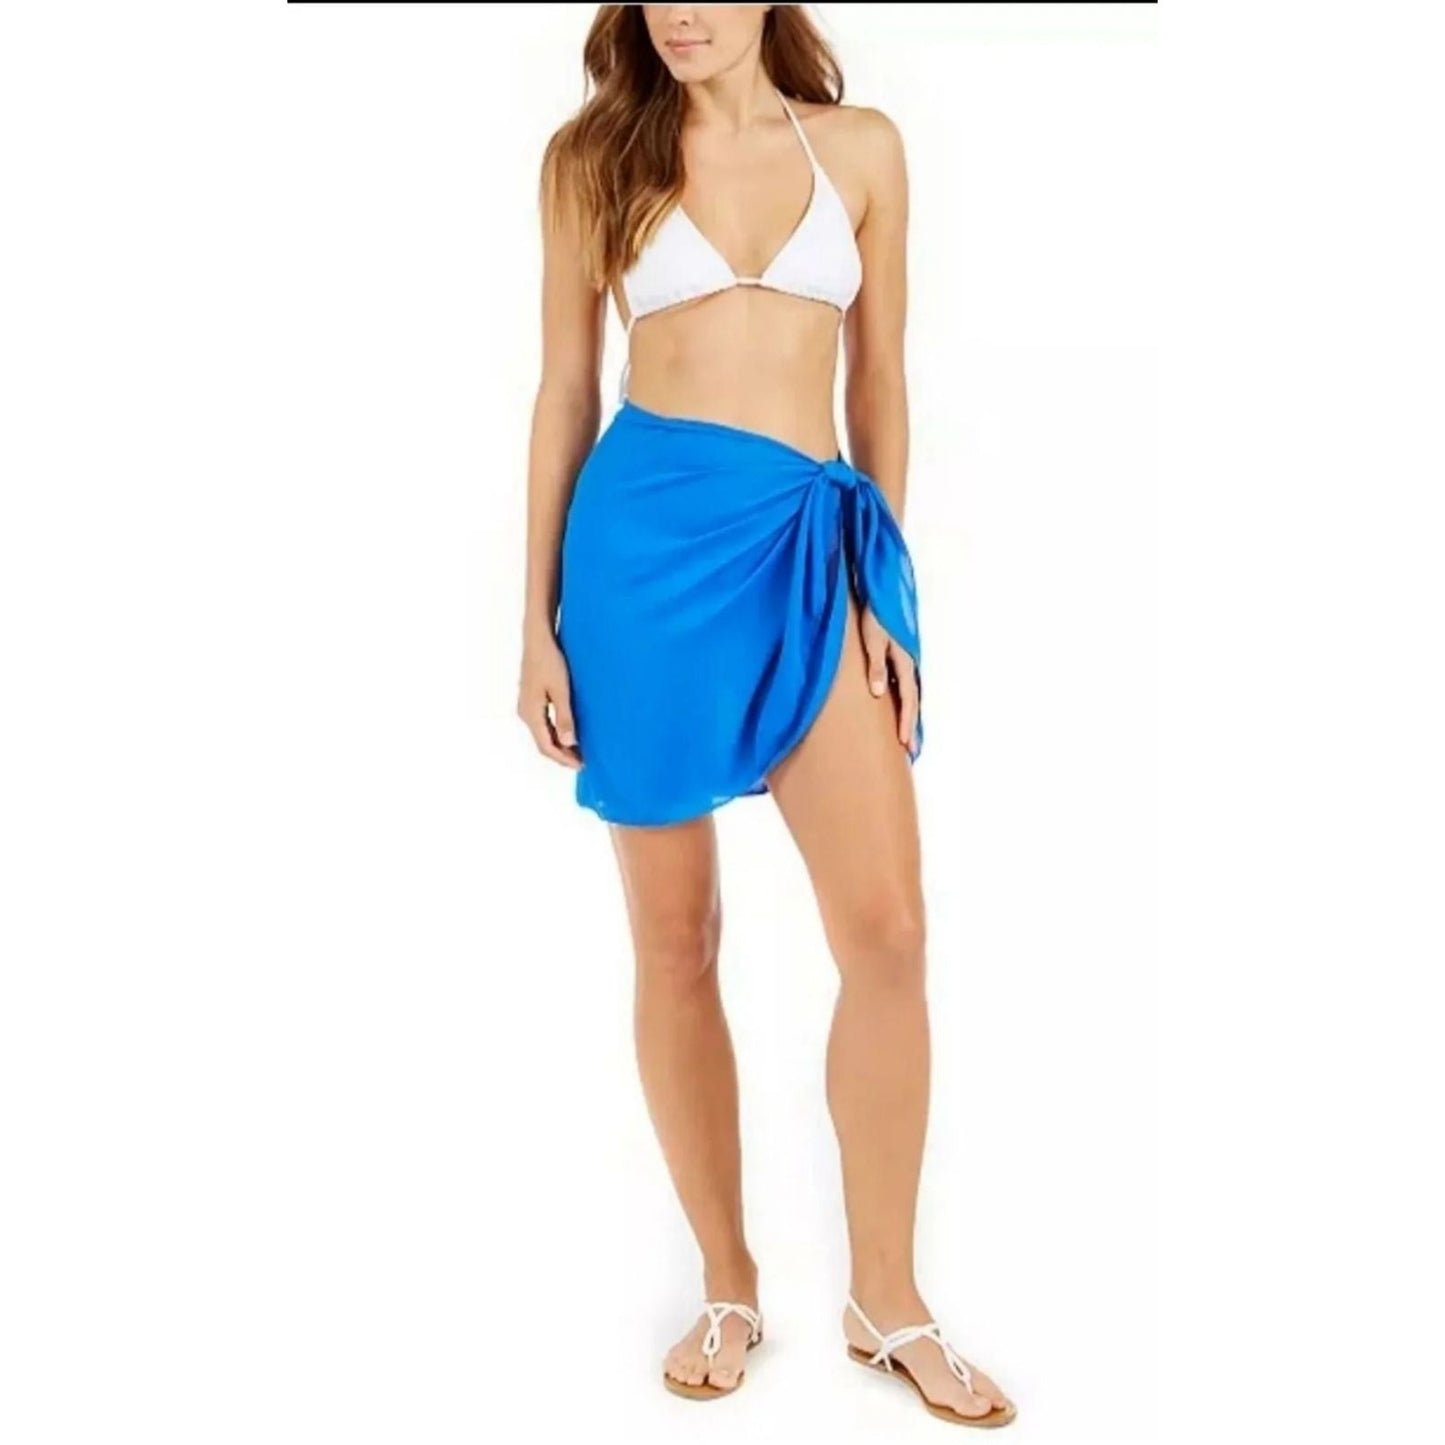 DOTTI Swimwear Coverup Summer Sarong Blue Pareo Swimsuit Cover-Up